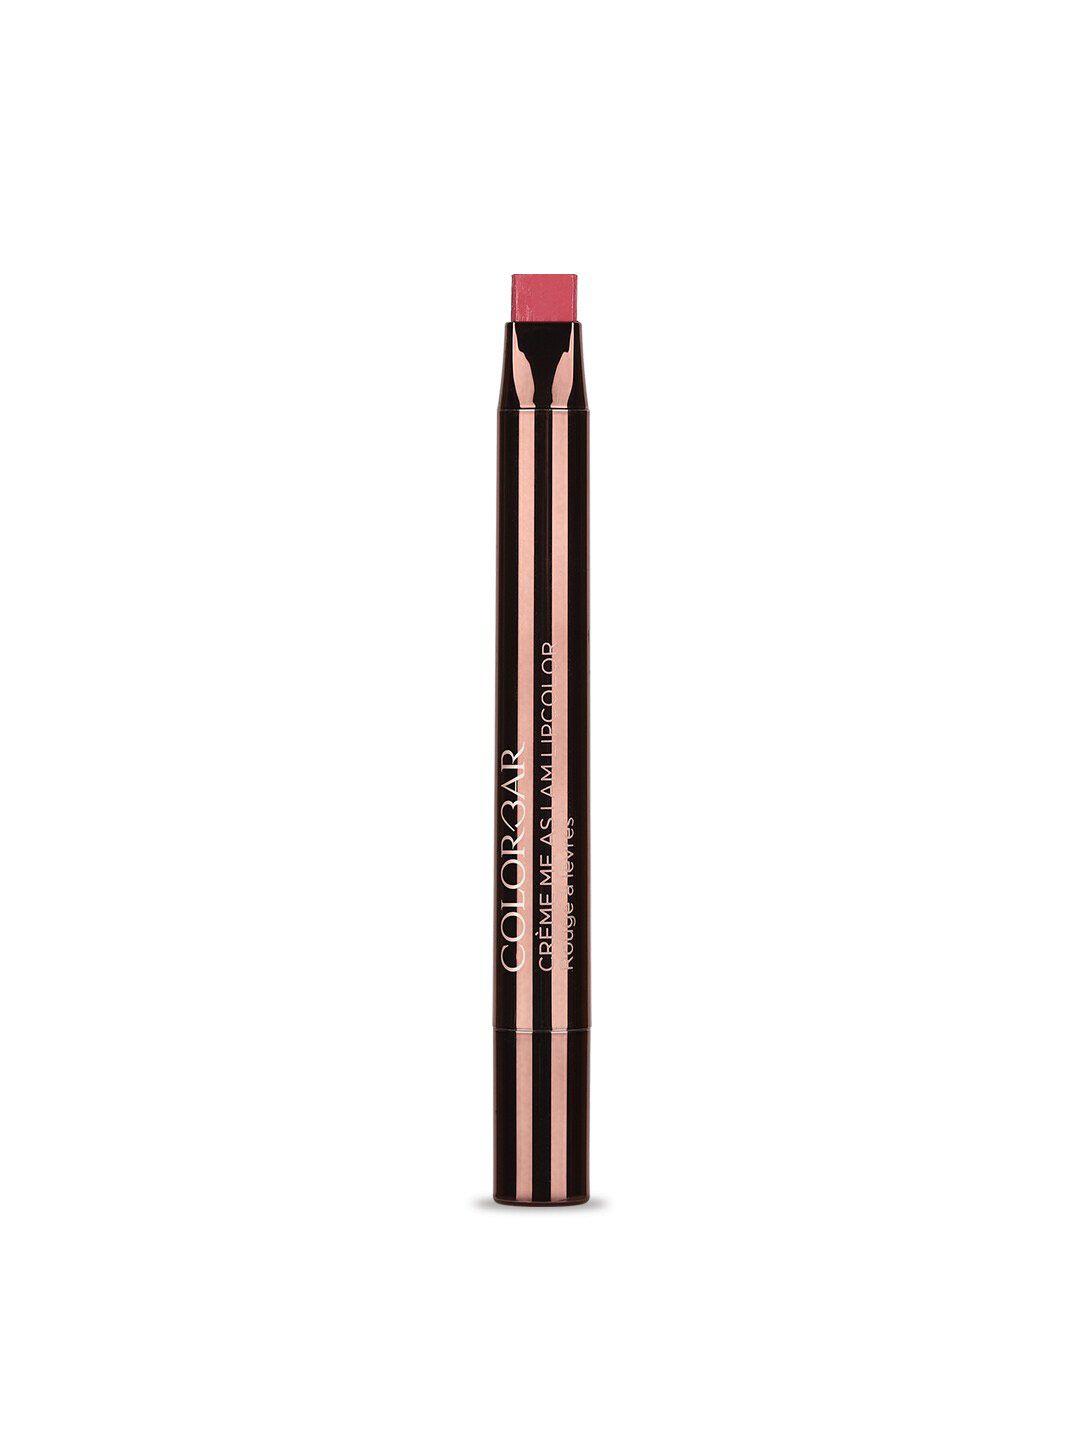 colorbar creme me as i am long lasting lipstick 0.8 g - delicacy 005